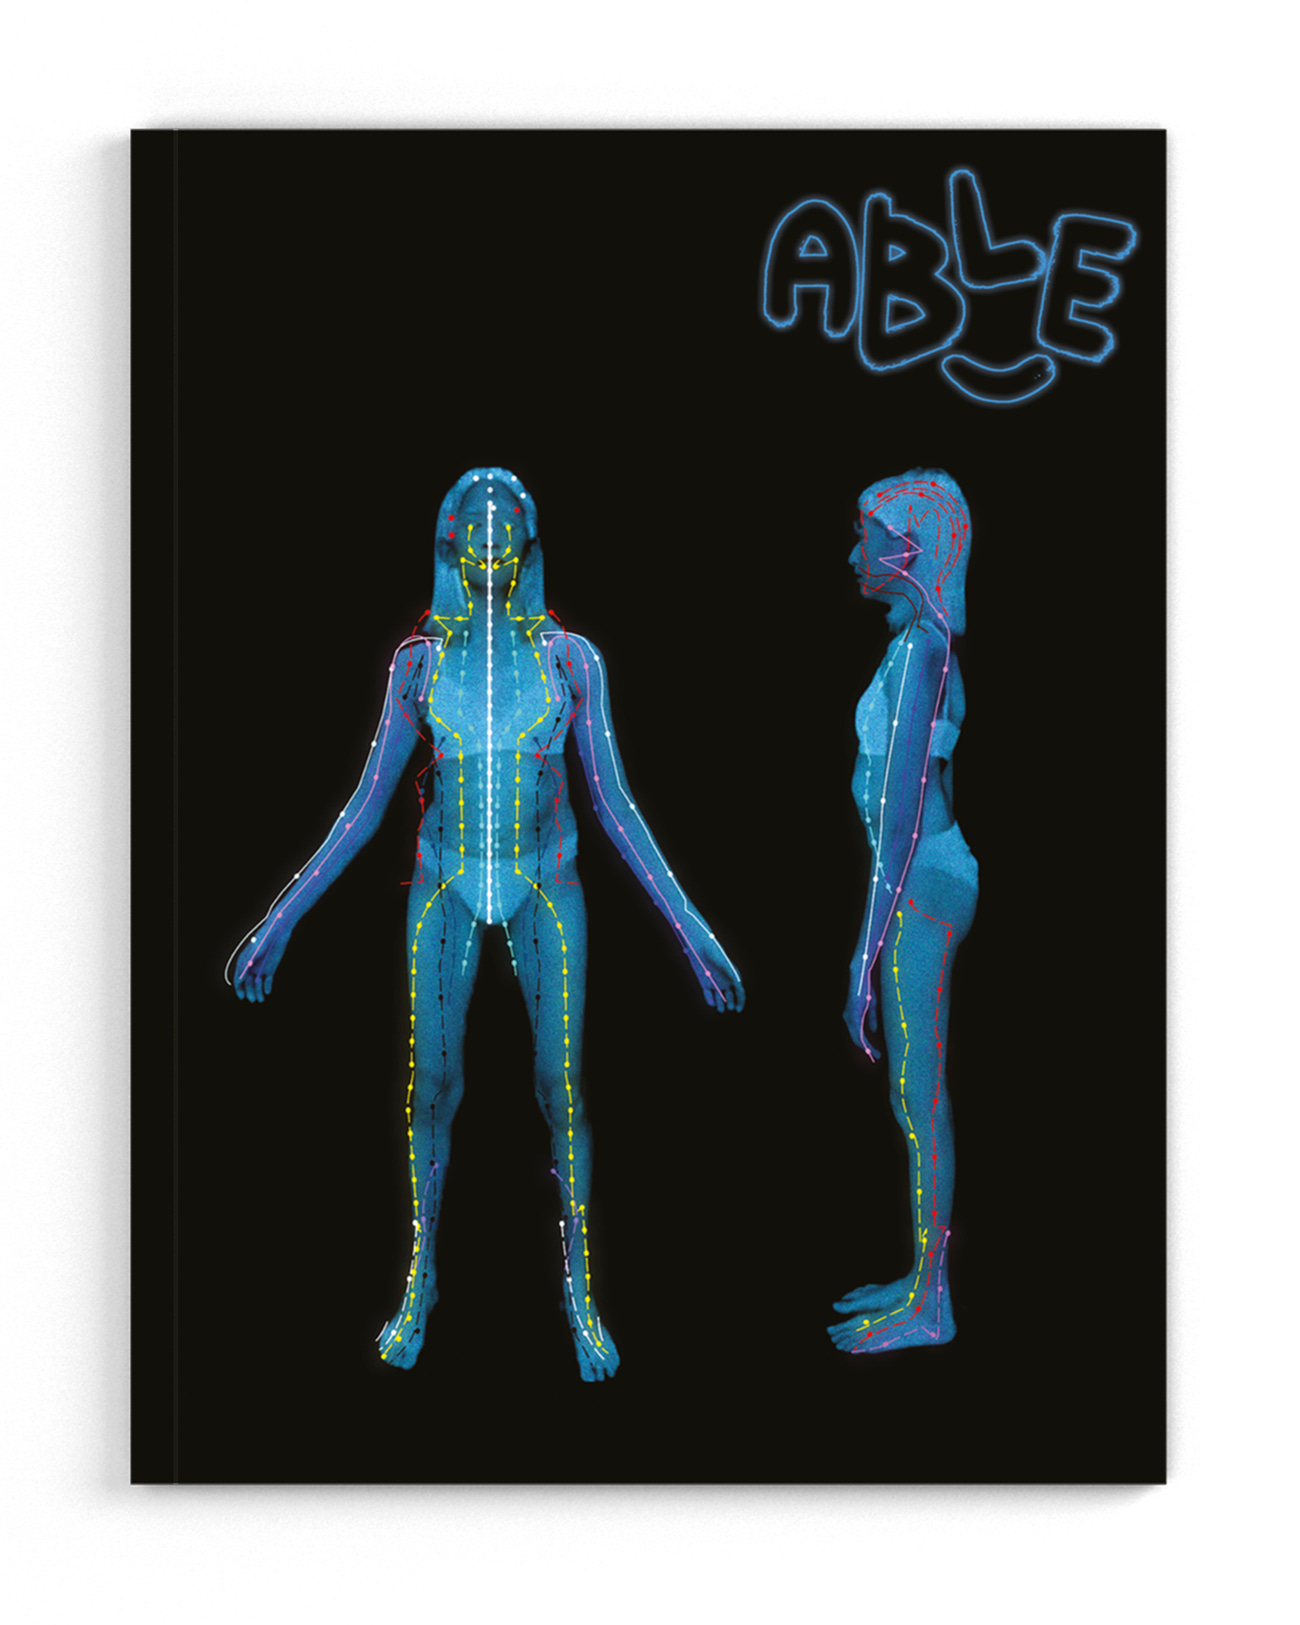 The front cover of Able Issue 2. Two silhouettes of Yo-Yo Lin’s body, one on the right side as a profile and the one on the left side facing forward. The two body shapes are translucent blue with colored lines and dots creating a skeletal map on a black background. The Able zine logo is translucent blue in the top right corner.